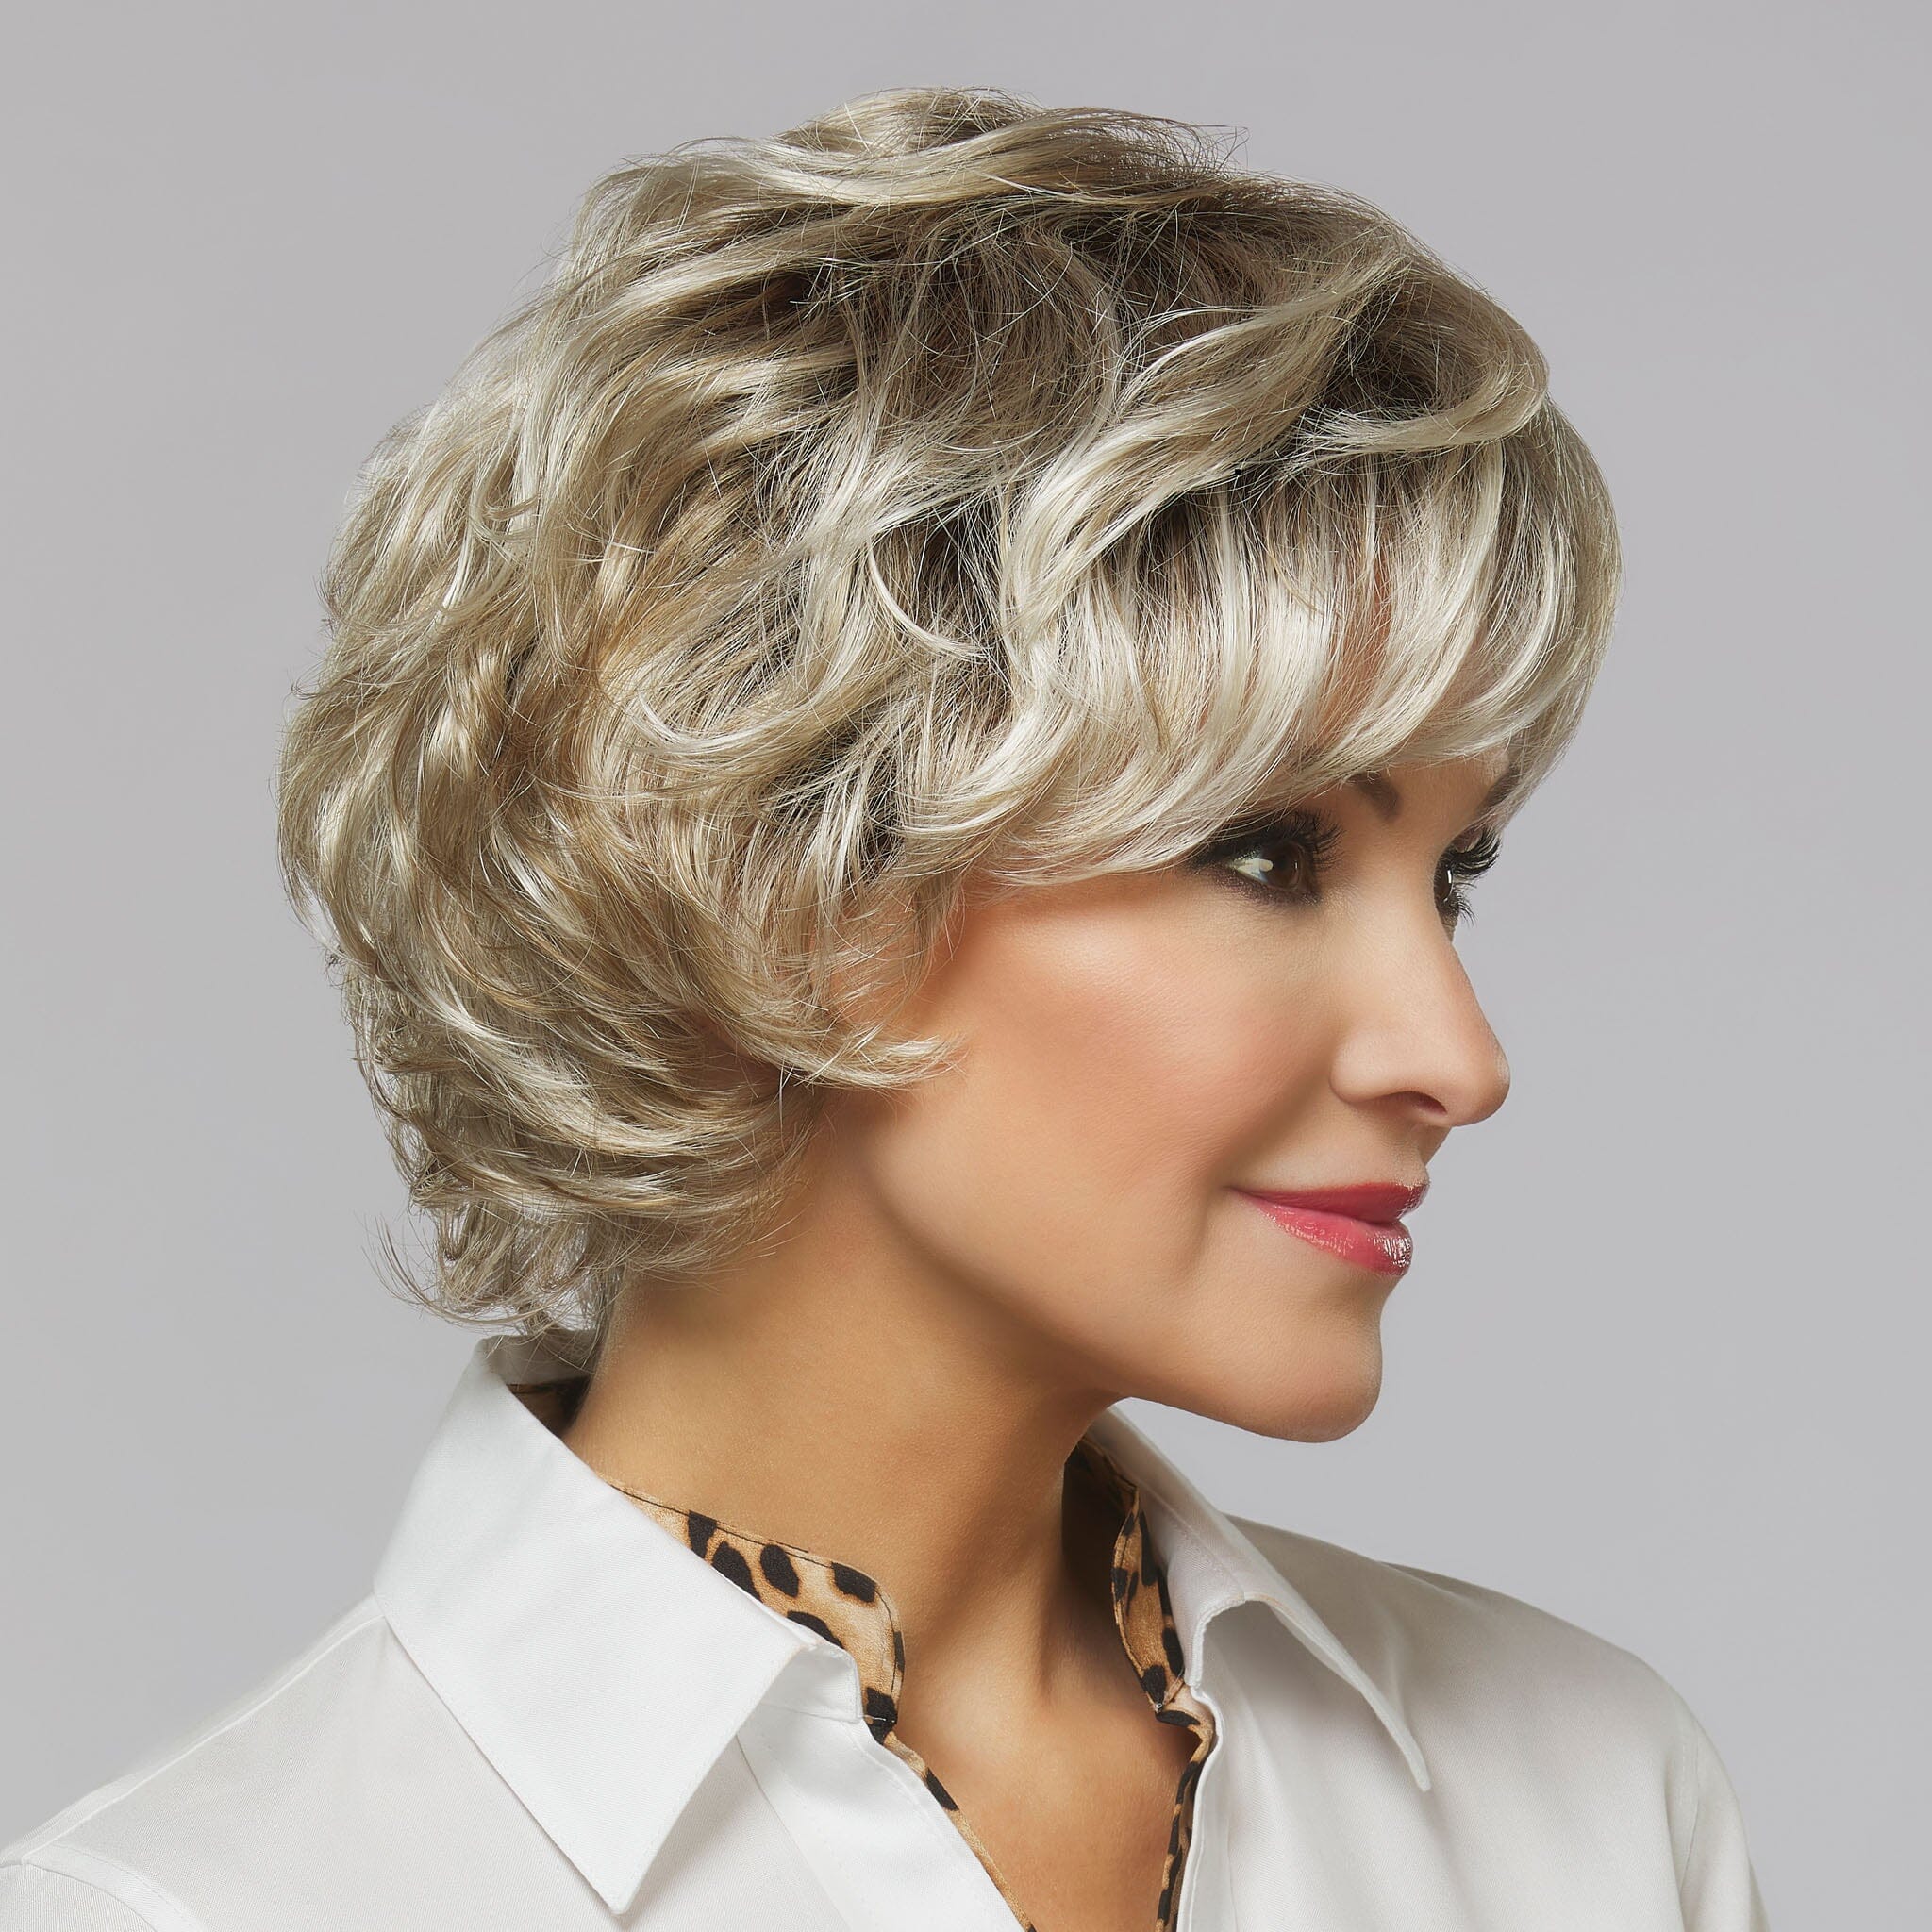 Henry Margu Hope Wig - 10/613GR Light Ash Blonde with Platinum Blonde Highlights and Medium Brown Roots Average - Cancer & Chemotherapy Wig